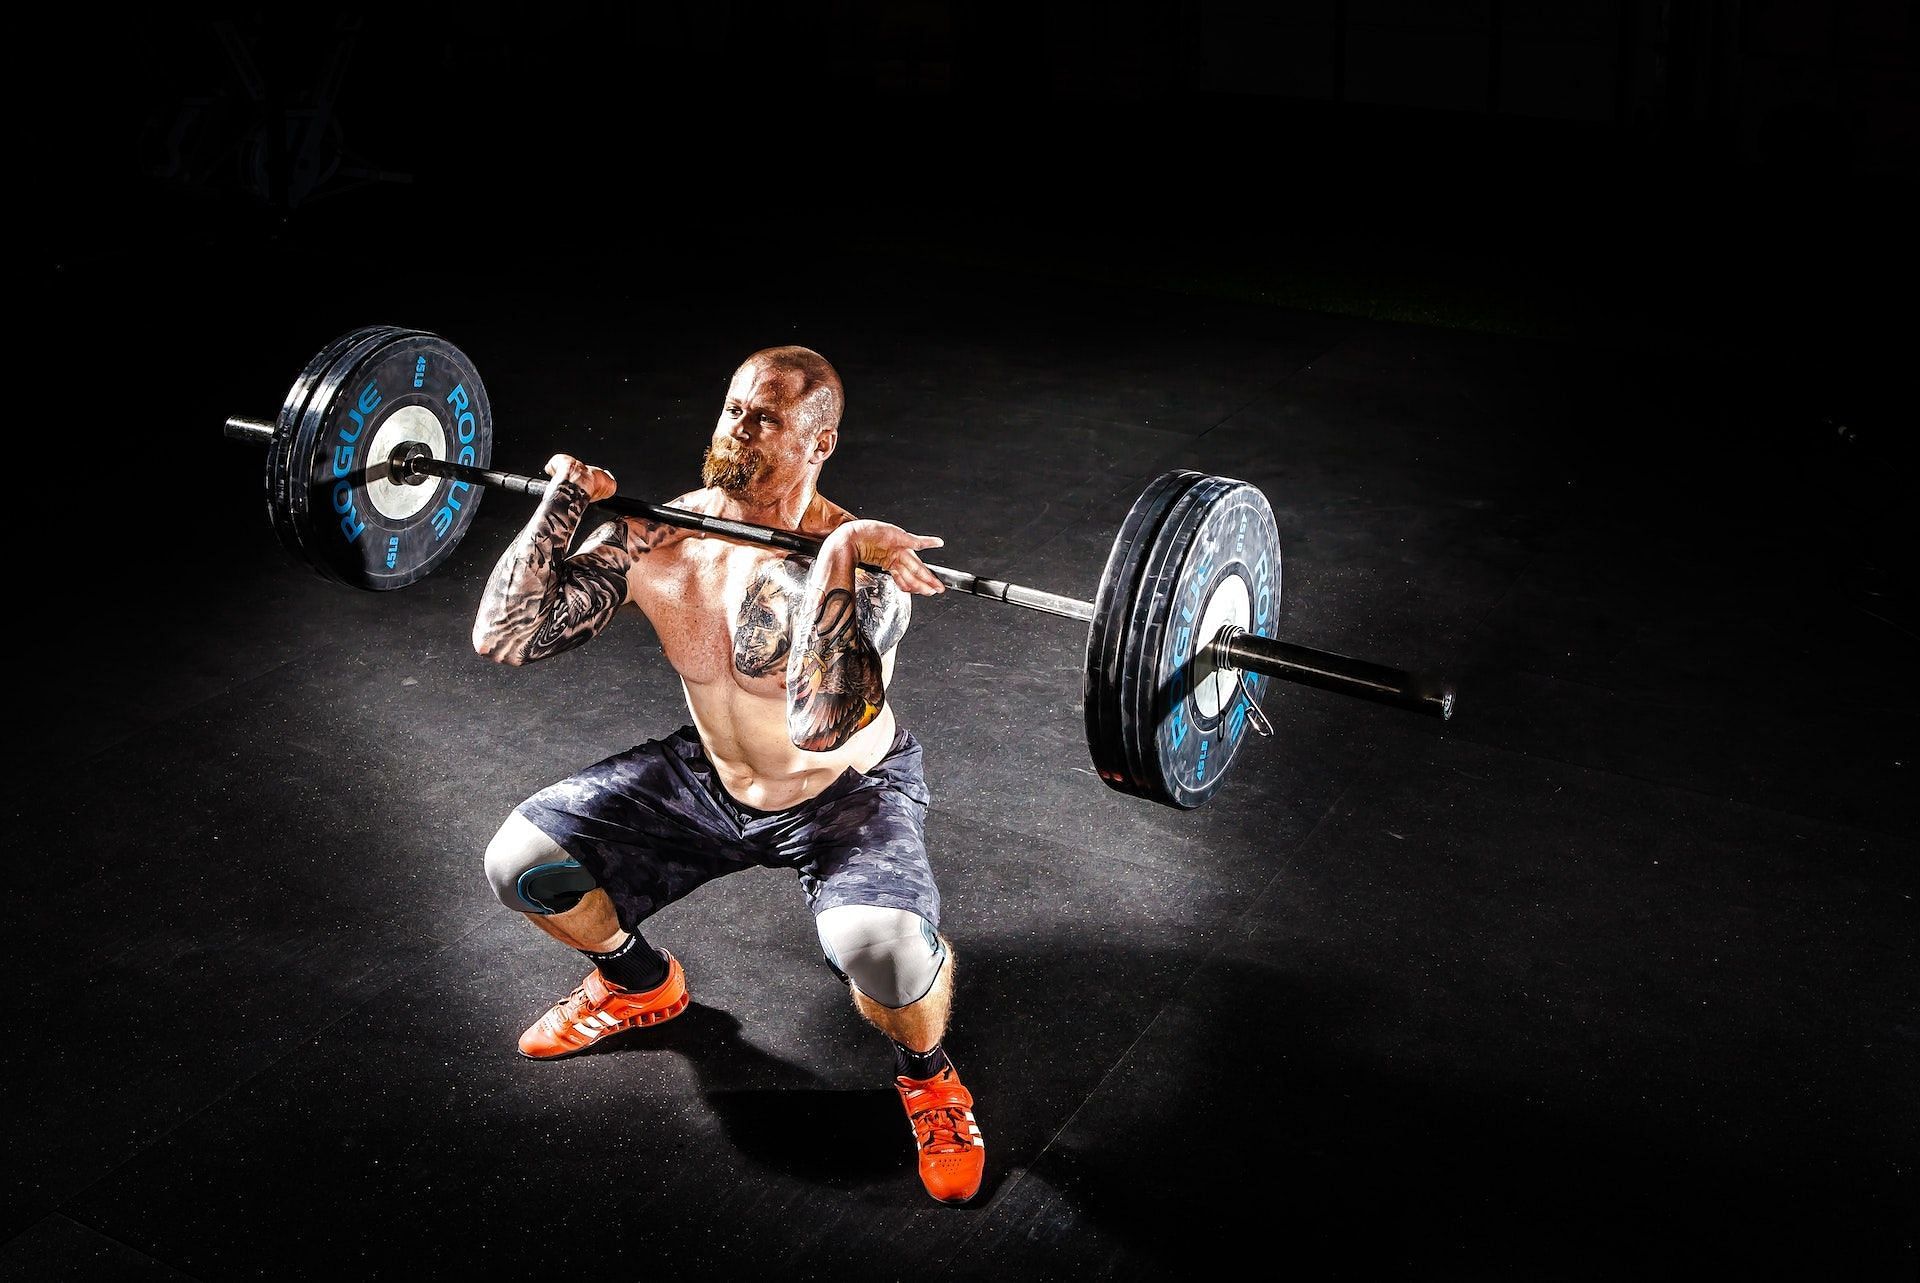 Barbell front raise exercise builds shoulder strength and stability. (Photo via Pexels/Binyamin Mellish)